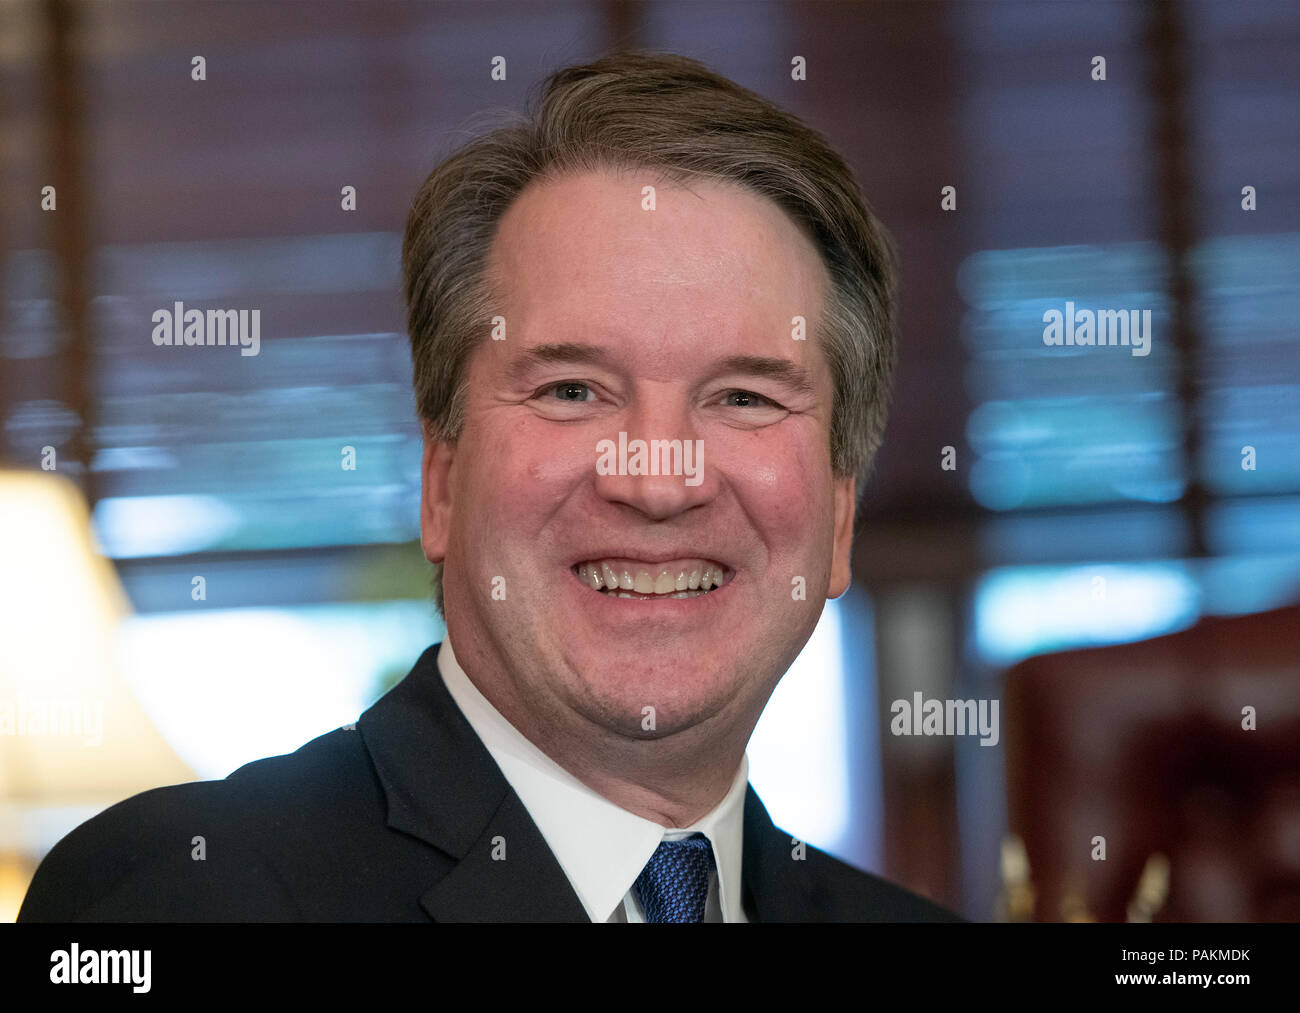 Washington, United States Of America. 24th July, 2018. Judge Brett M. Kavanaugh, United States President Donald J. Trump's nominee to replace Justice Anthony Kennedy on the US Supreme Court, smiles during a photo op in the office of US Senator John Kennedy (Republican of Louisiana) on Capitol Hill in Washington, DC on Tuesday, July 24, 2018. Credit: Ron Sachs/CNP | usage worldwide Credit: dpa/Alamy Live News Stock Photo